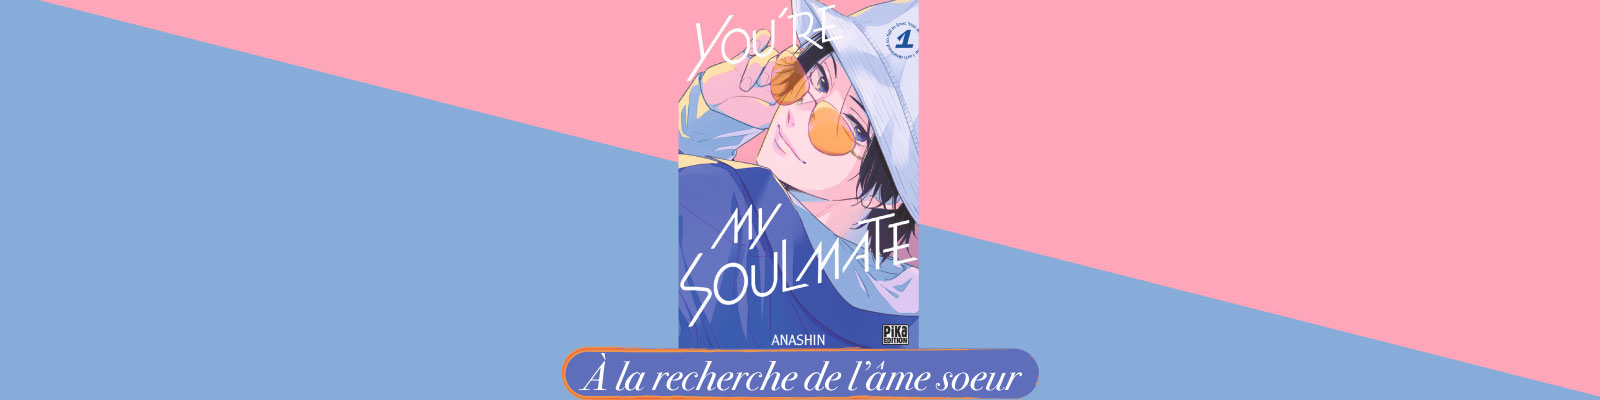 You're my Soulmate